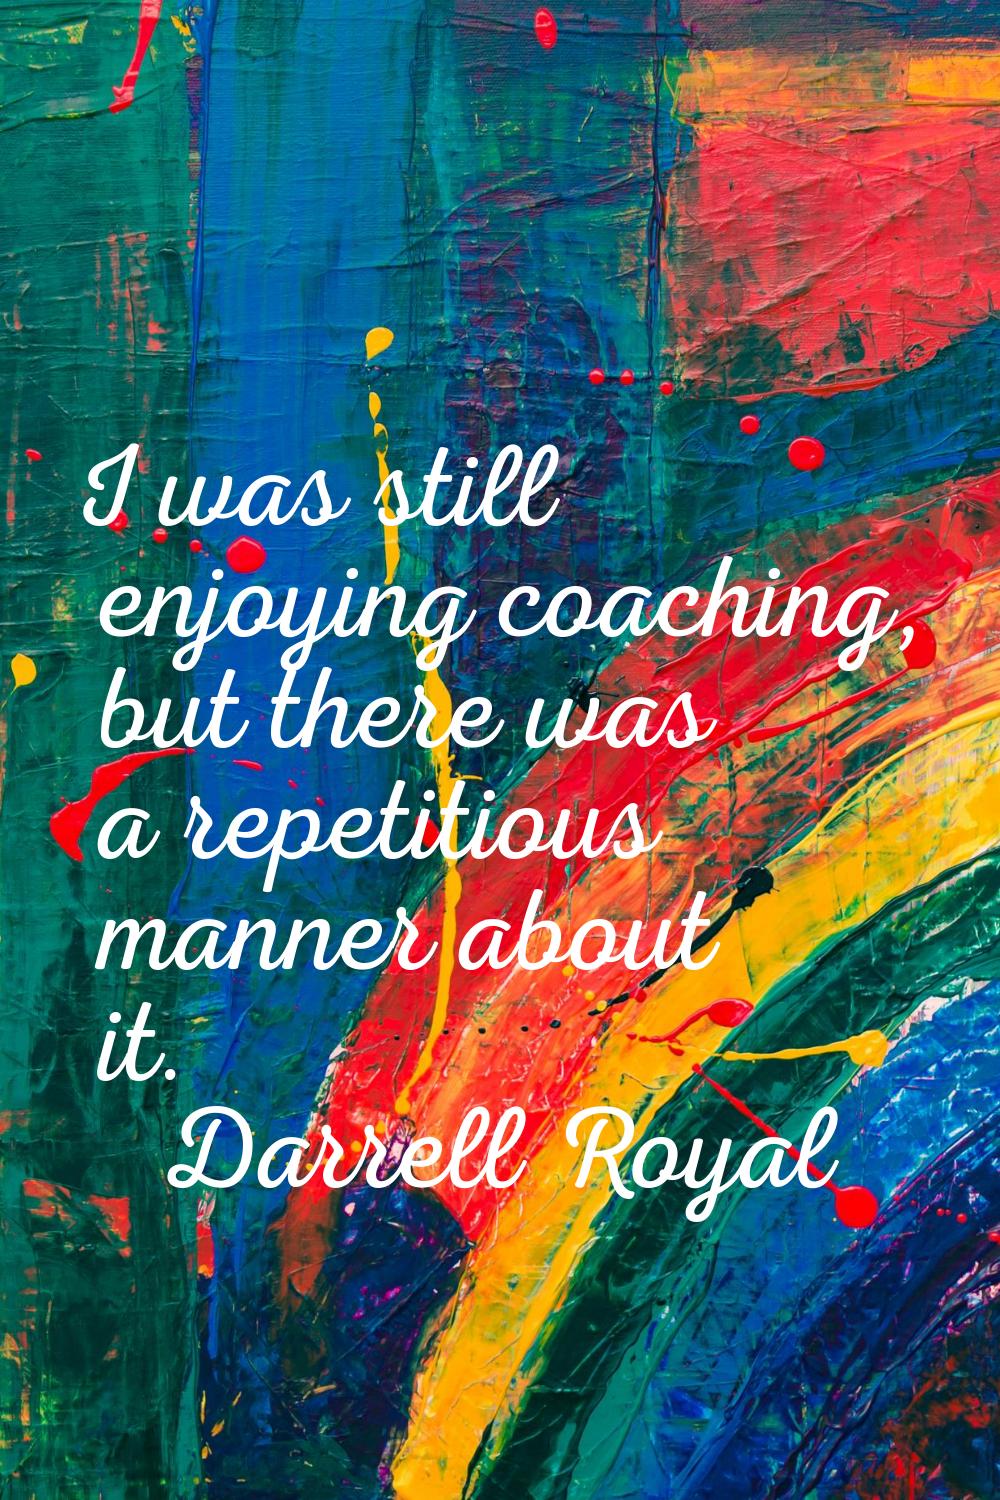 I was still enjoying coaching, but there was a repetitious manner about it.